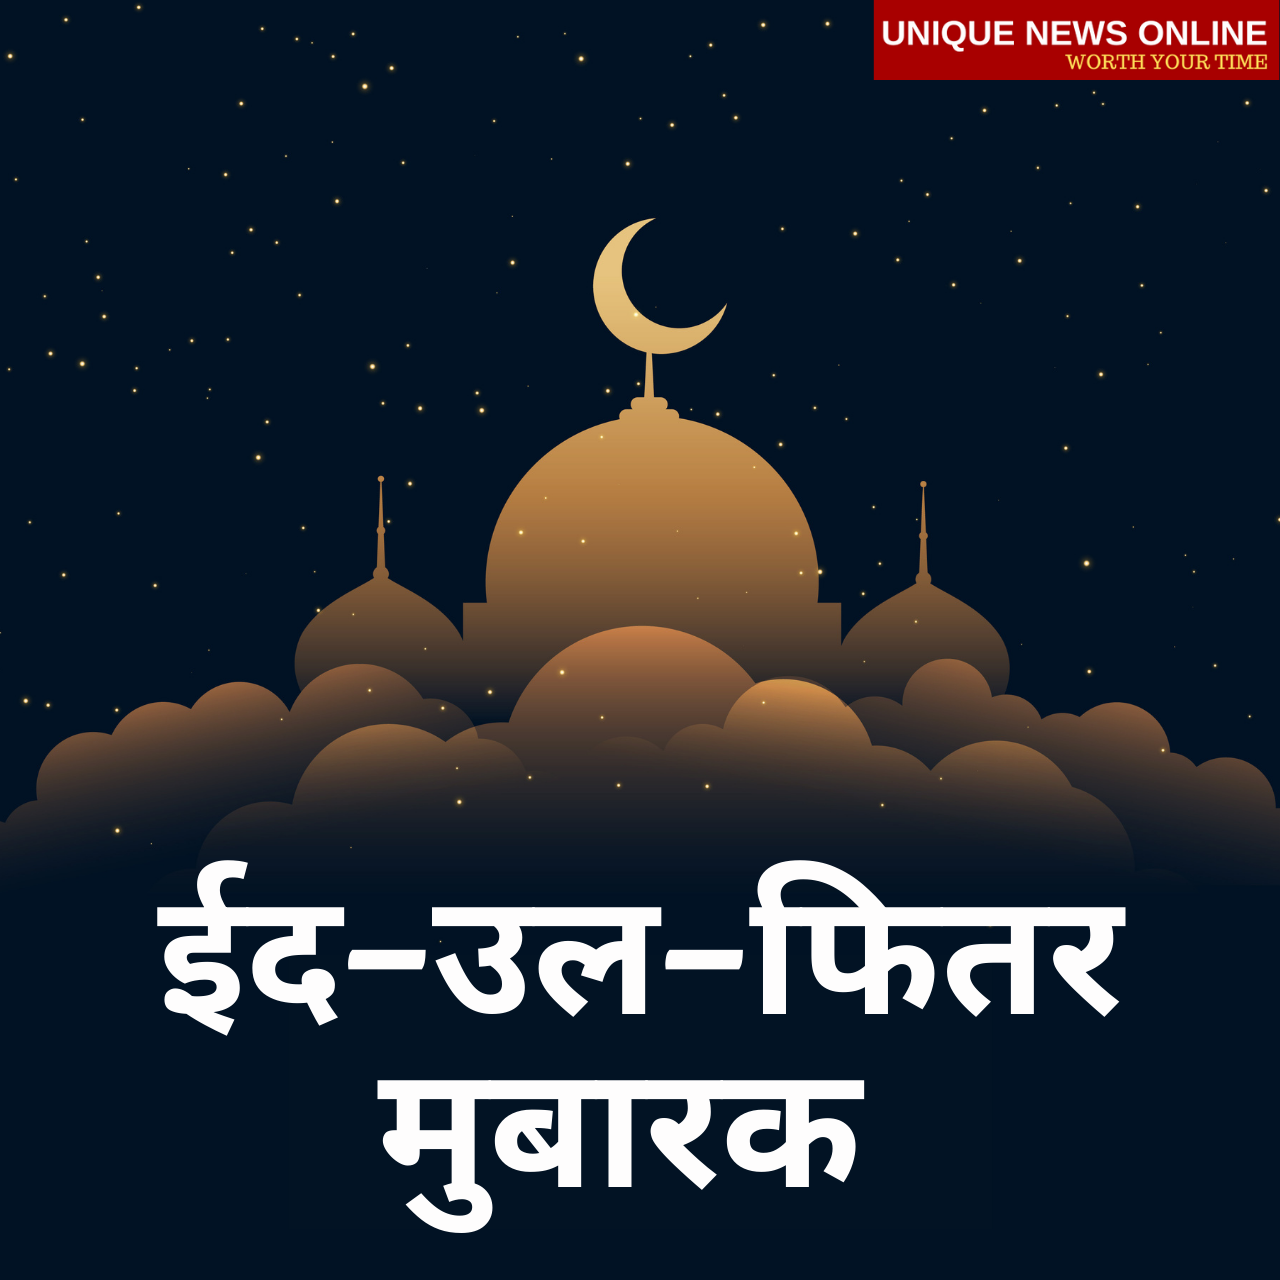 Eid-ul-Fitr Mubarak 2021 Wishes in Hindi, Images, Greetings, Status, Messages, and Quotes to share on this Eid al-Fitr